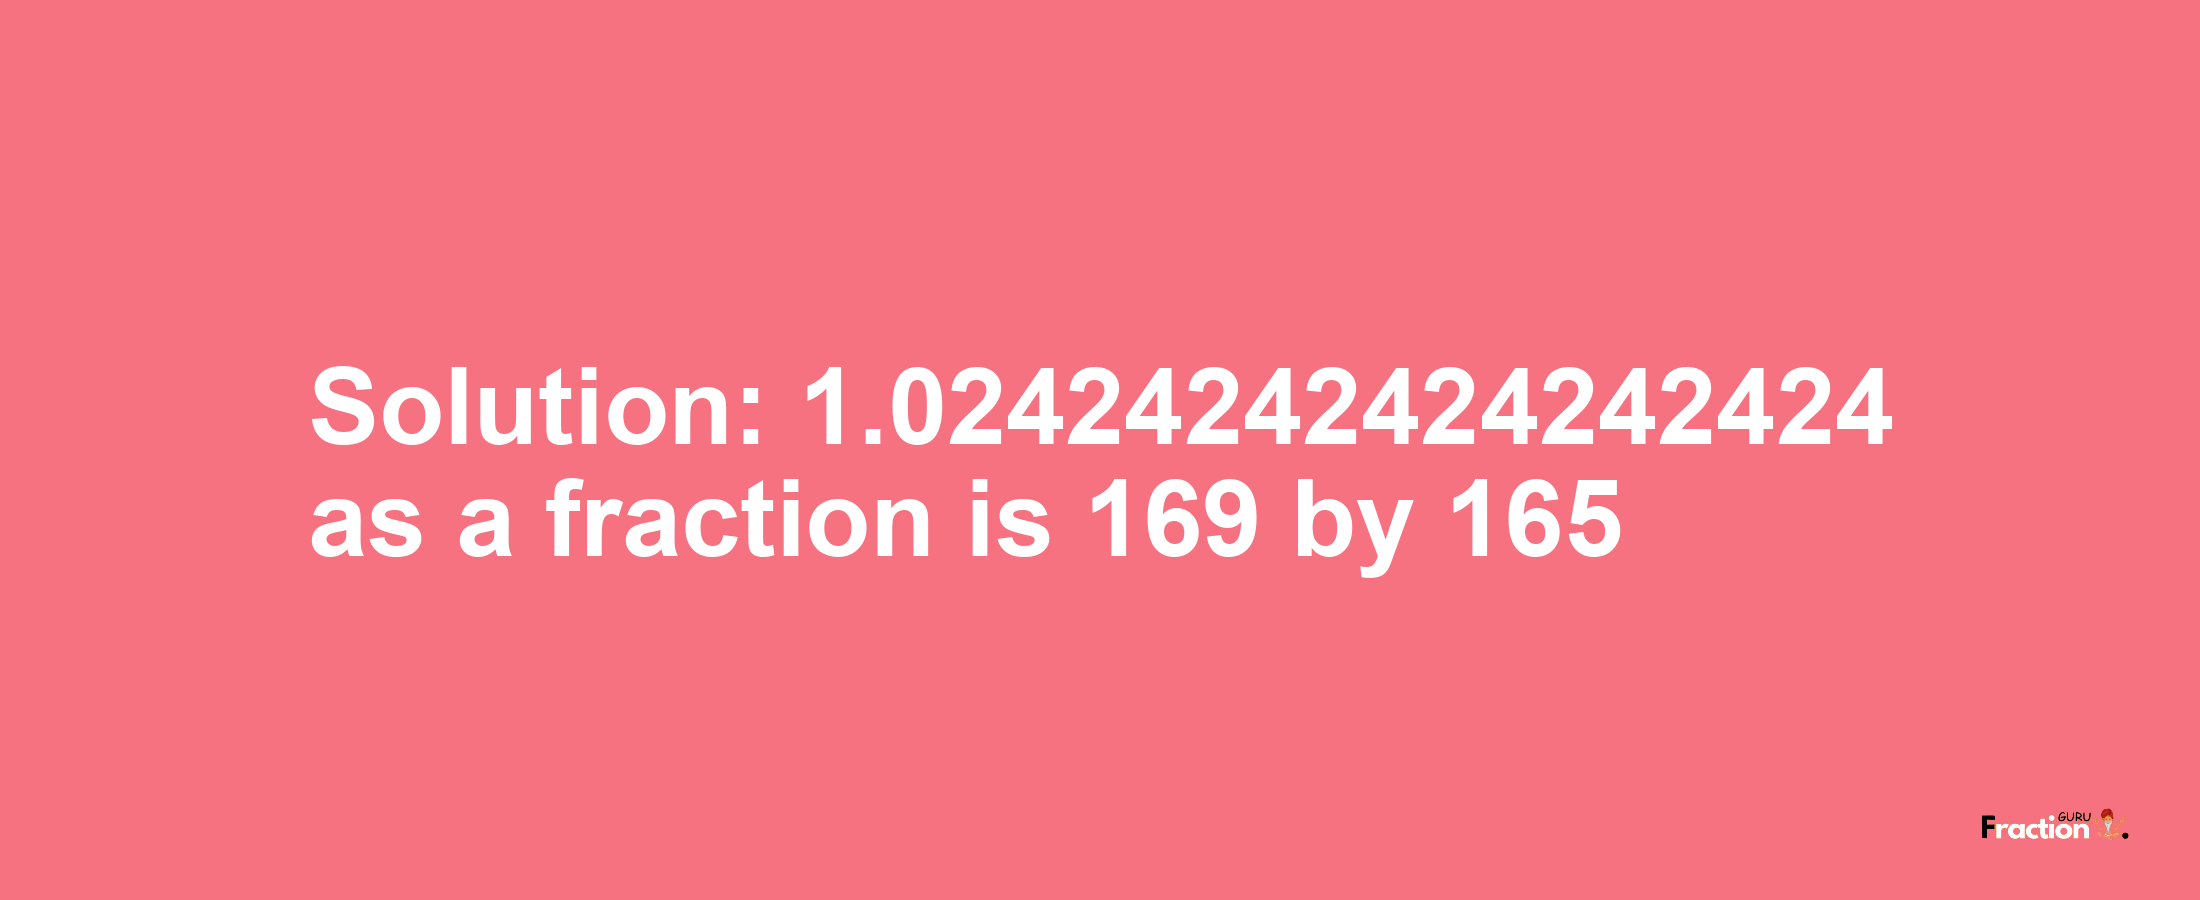 Solution:1.02424242424242424 as a fraction is 169/165